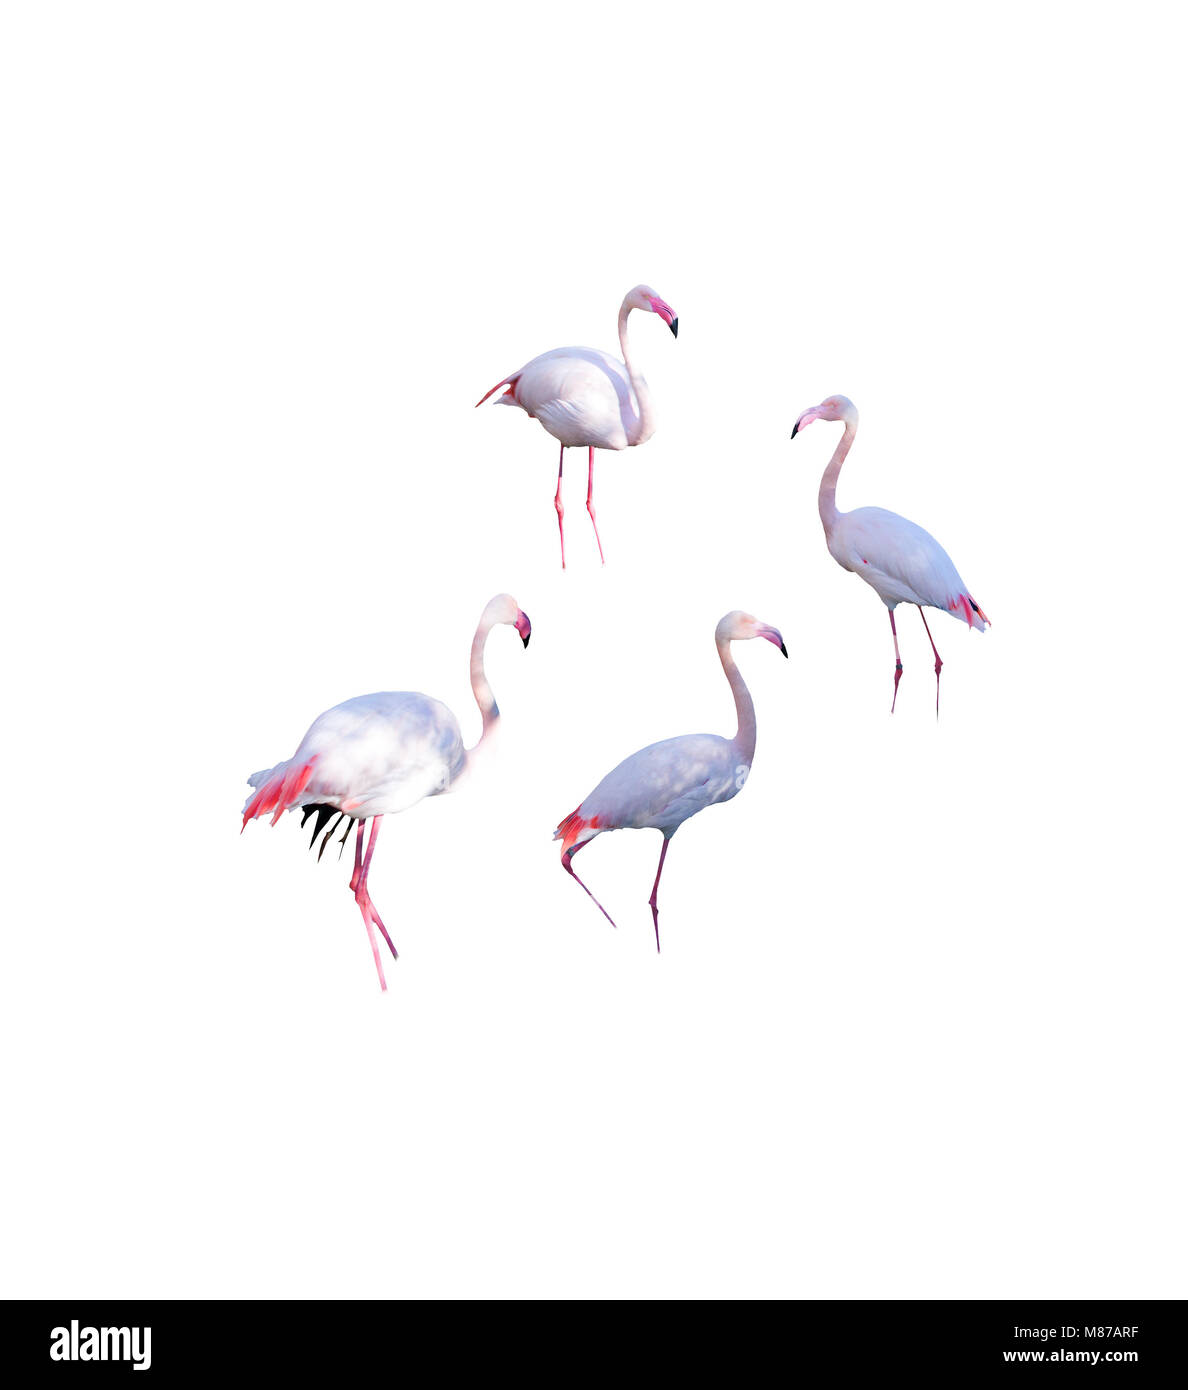 Four flamingos isolated on white background imaginary water without visible feet Stock Photo